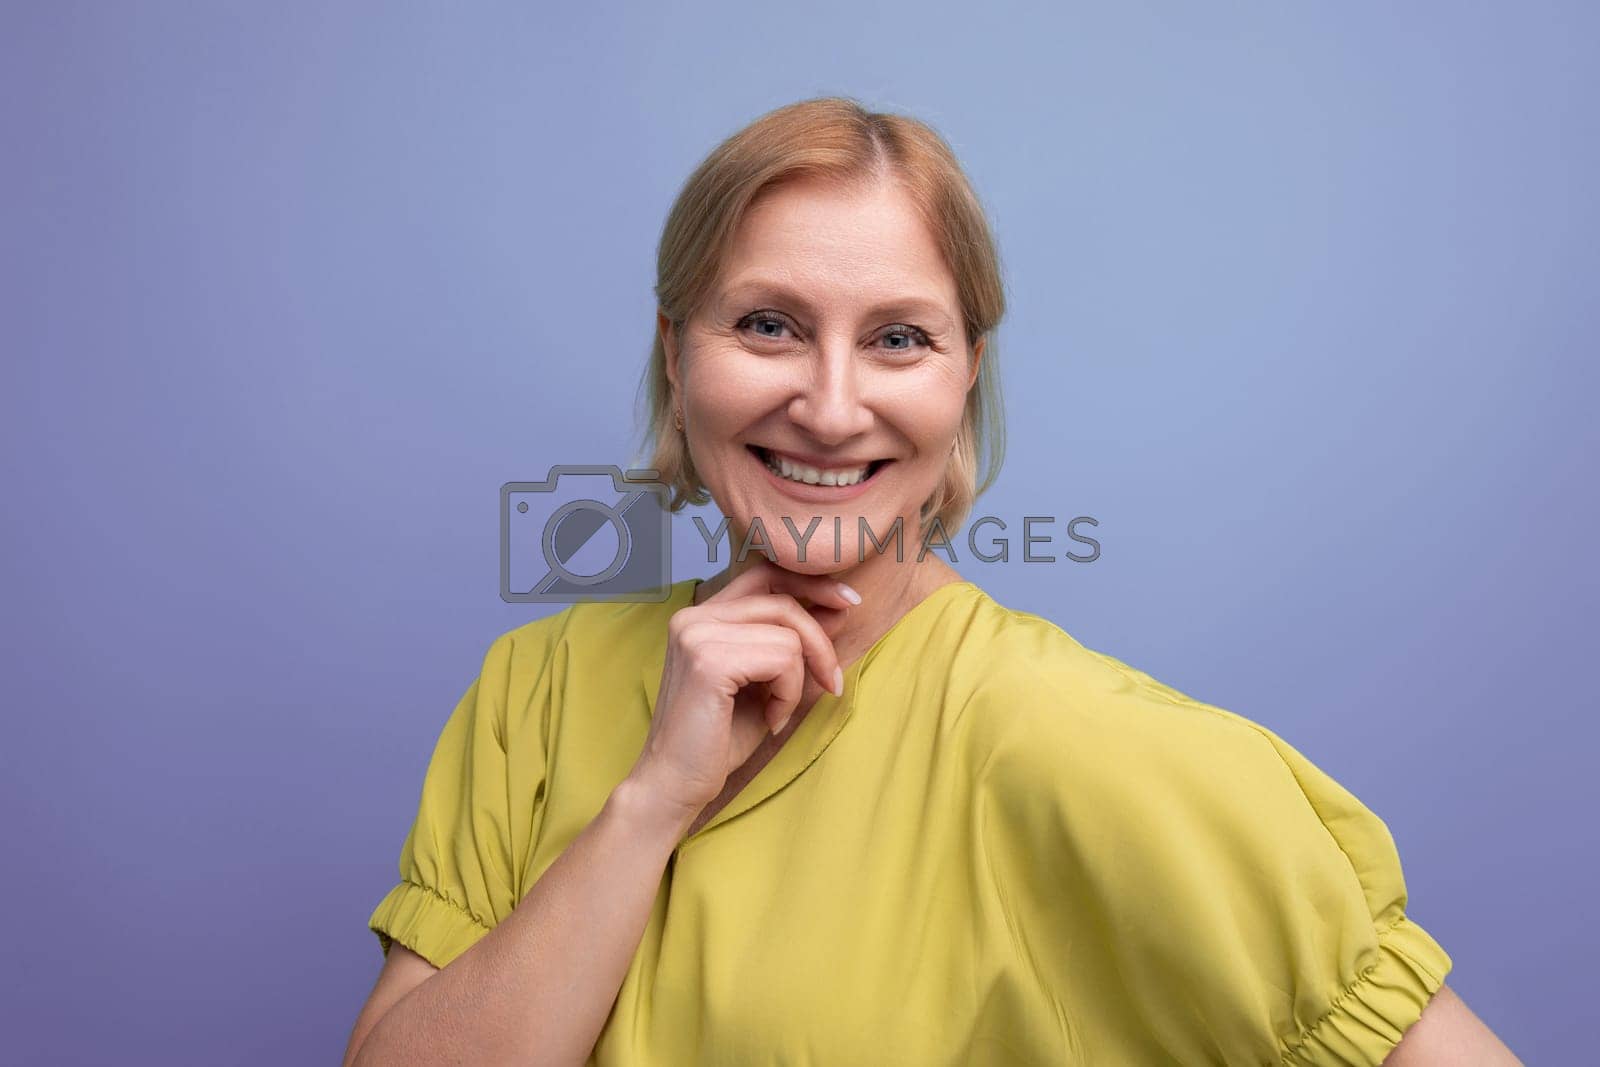 Royalty free image of horizontal closeup of happy middle aged woman in casual outfit by TRMK